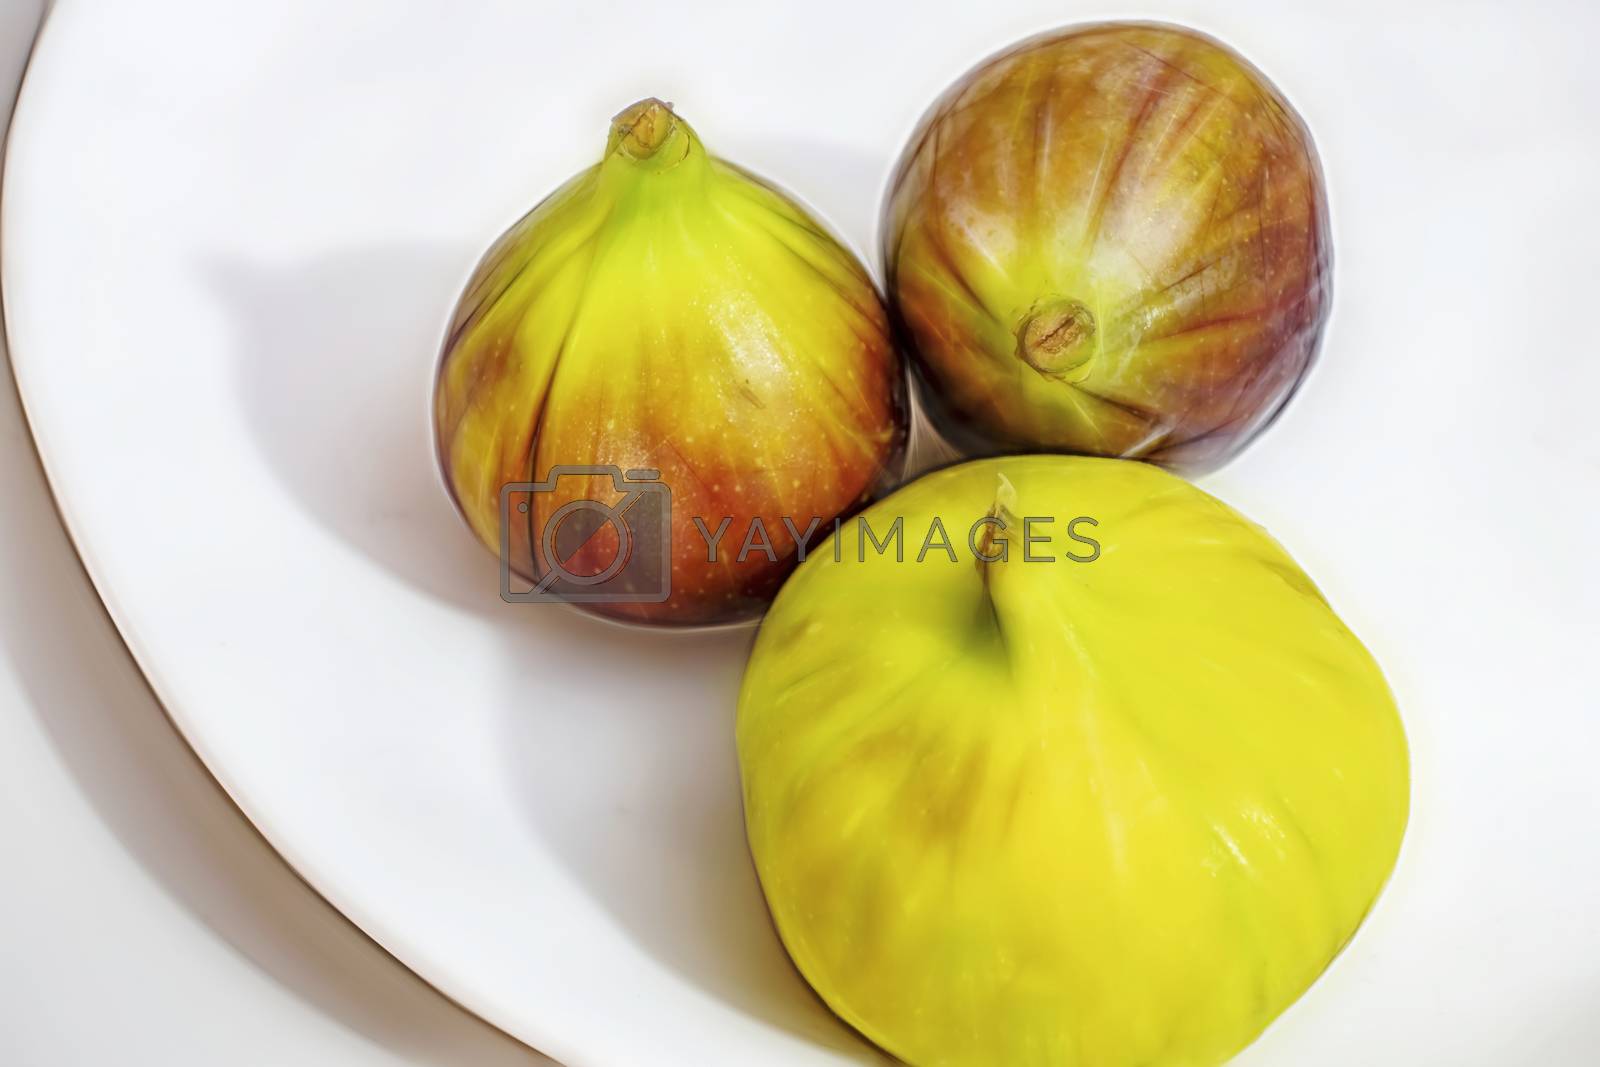 Royalty free image of ready to eat fig fruits on white plate by yilmazsavaskandag